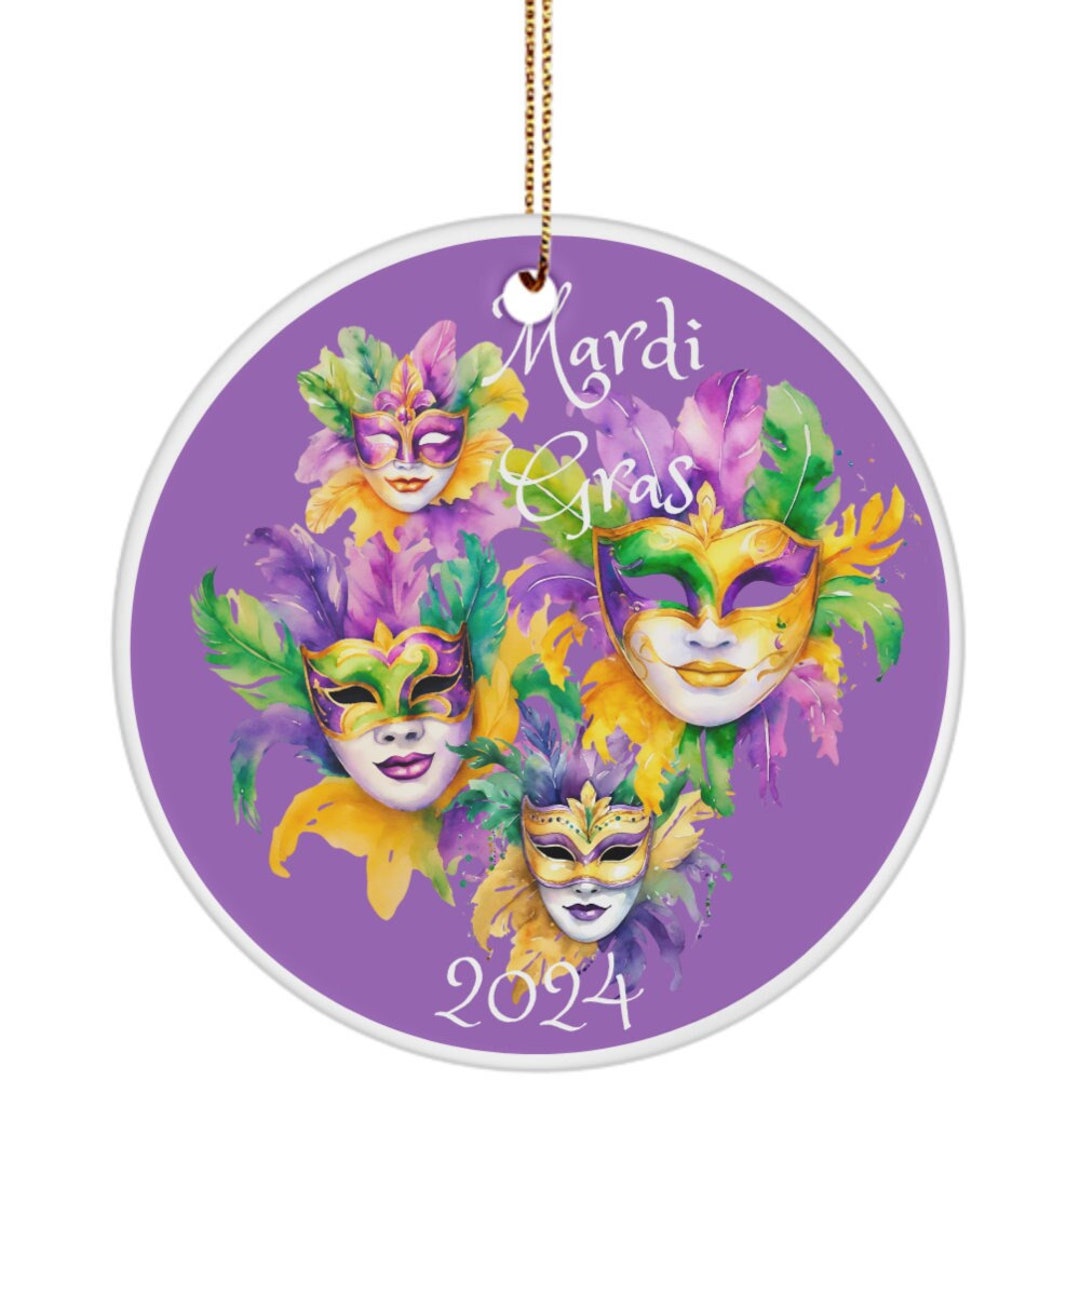 Butterfly With Ornaments And Fleur De Lis For Mardi Gras - Mardi Gras -  Sticker